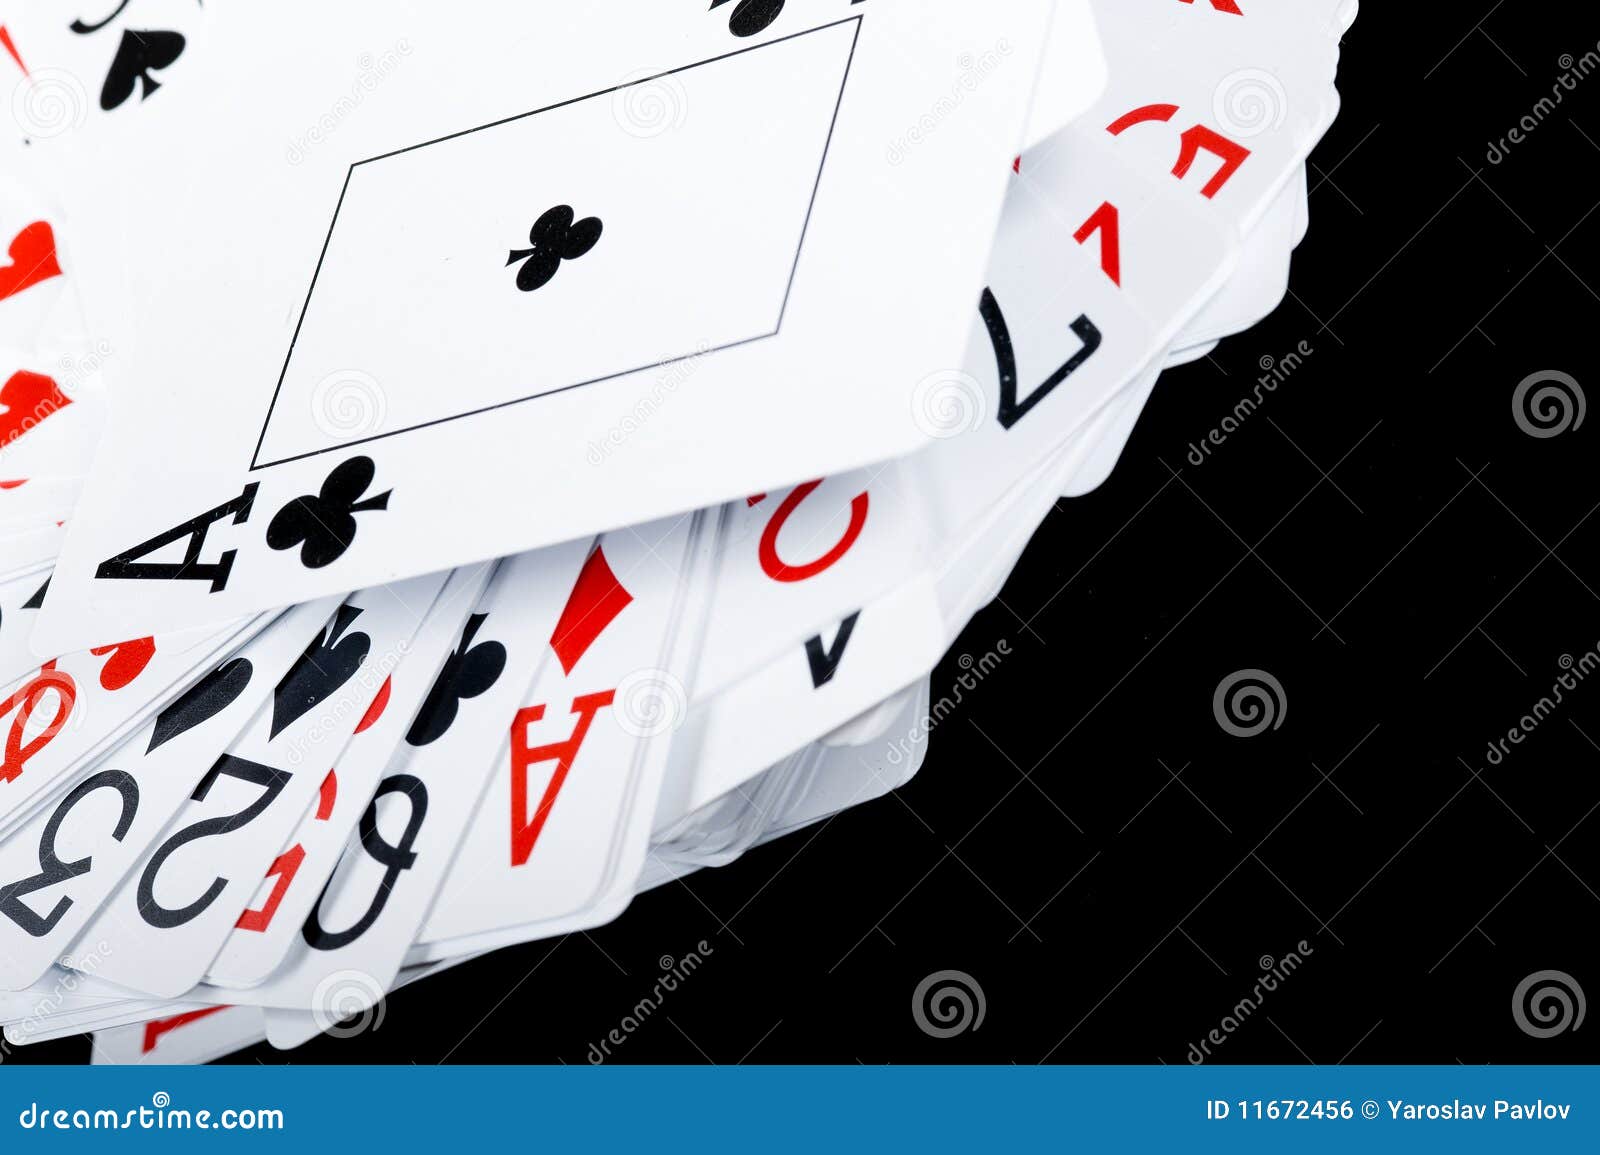 Background With Playing Cards Stock Photo - Image of ideas, fortune